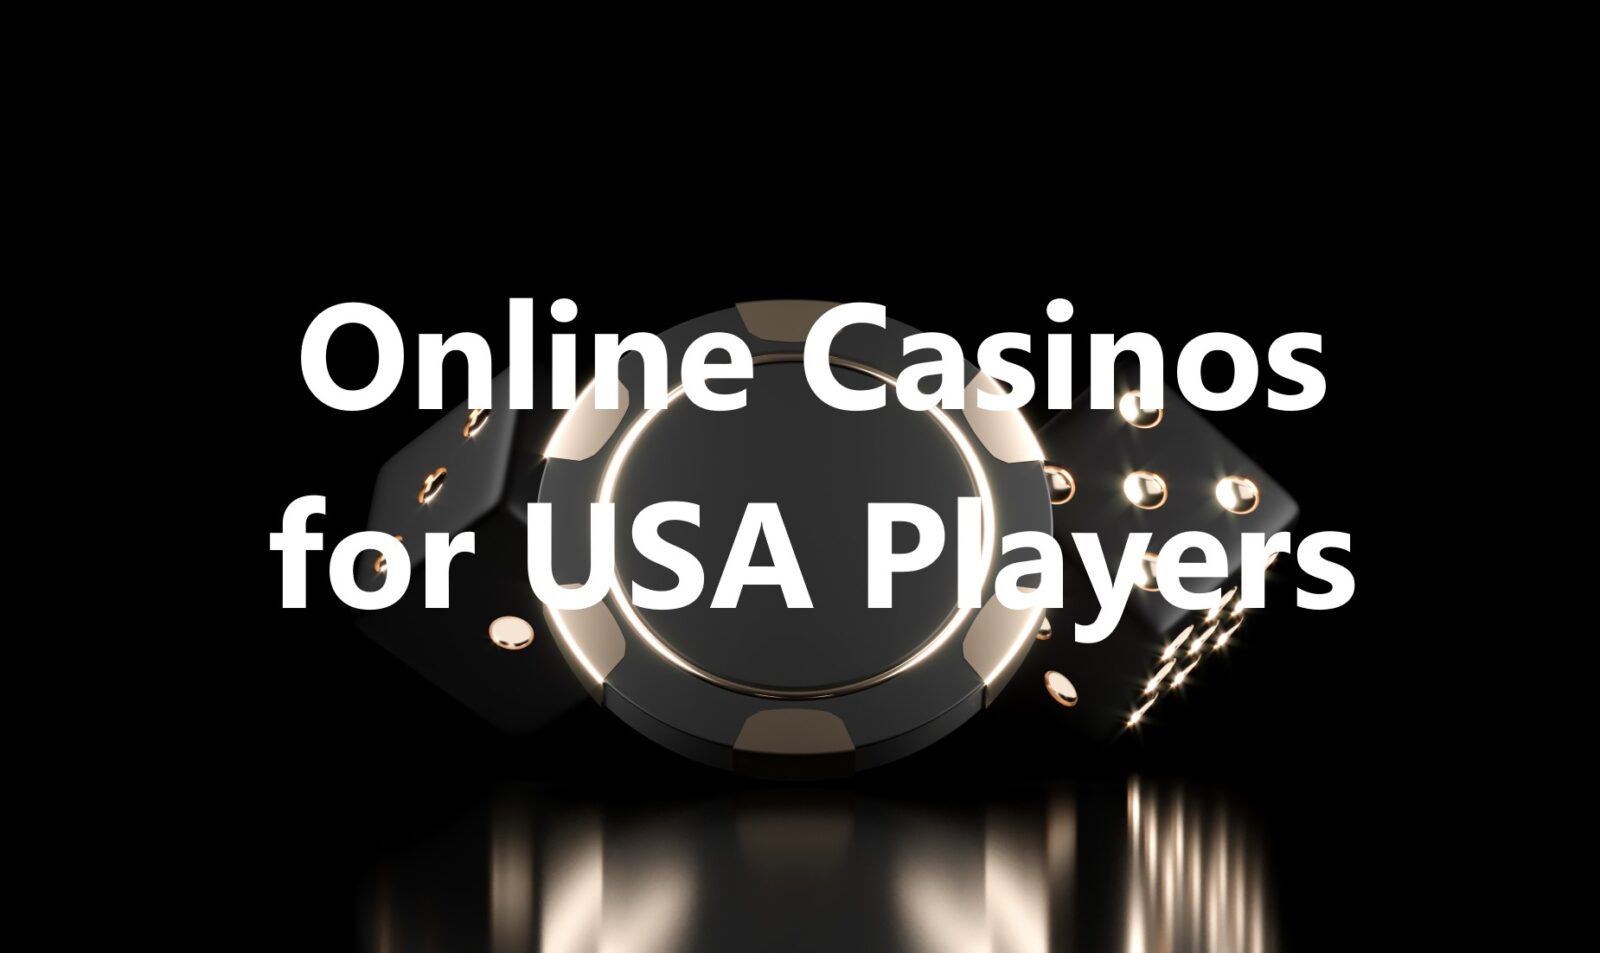 Online Casinos for USA Players